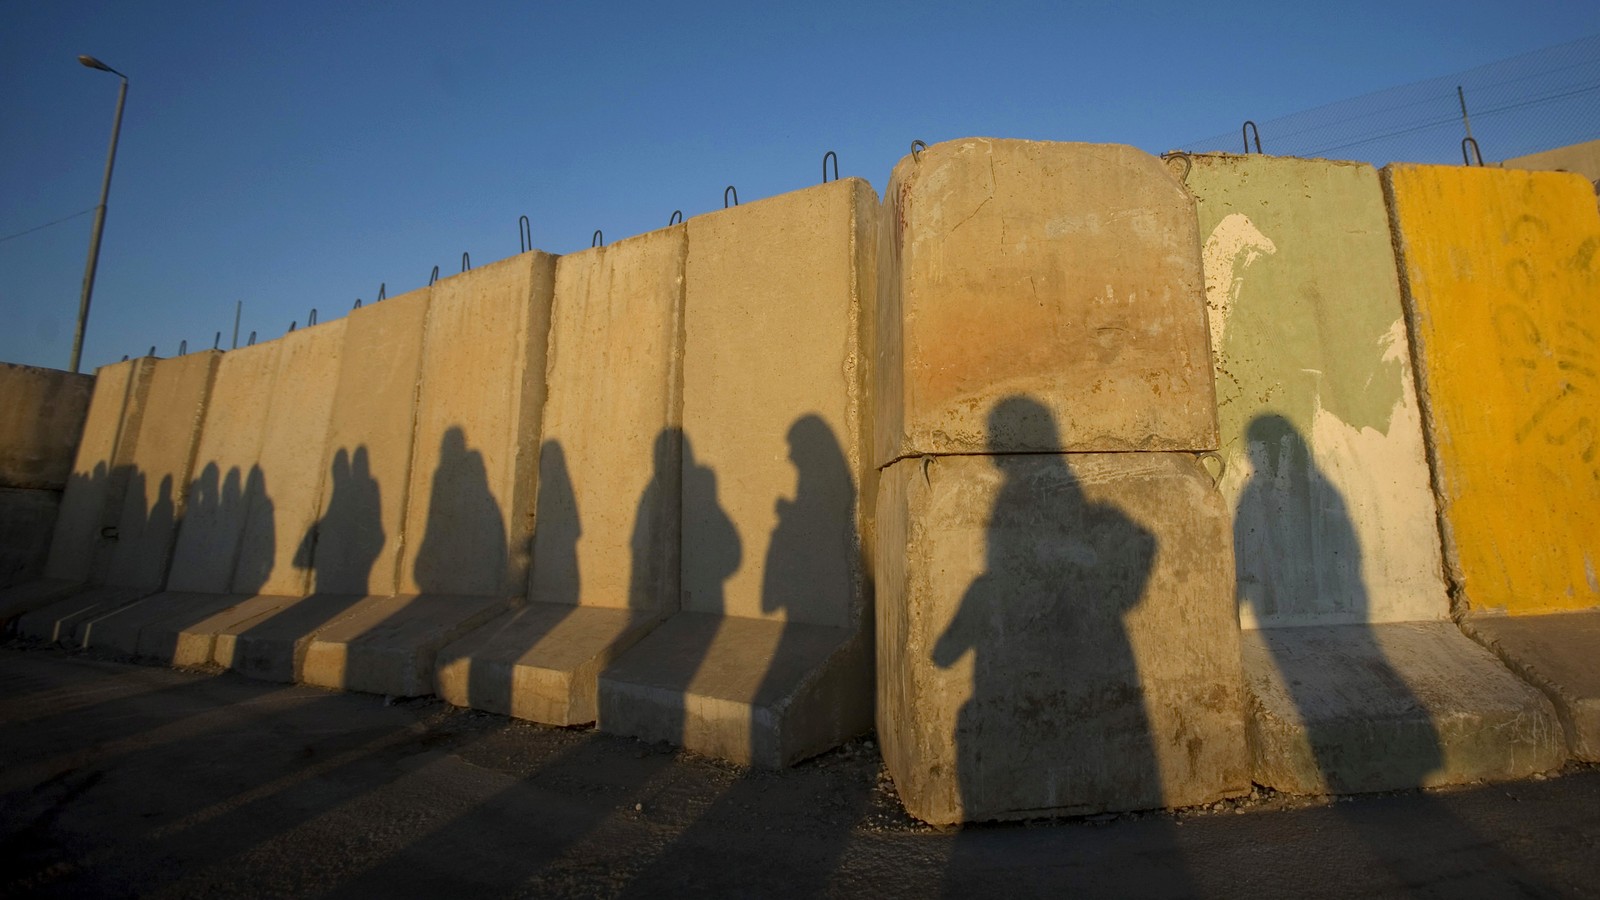 Eight Steps to Shrink the Israeli-Palestinian Conflict - The Atlantic